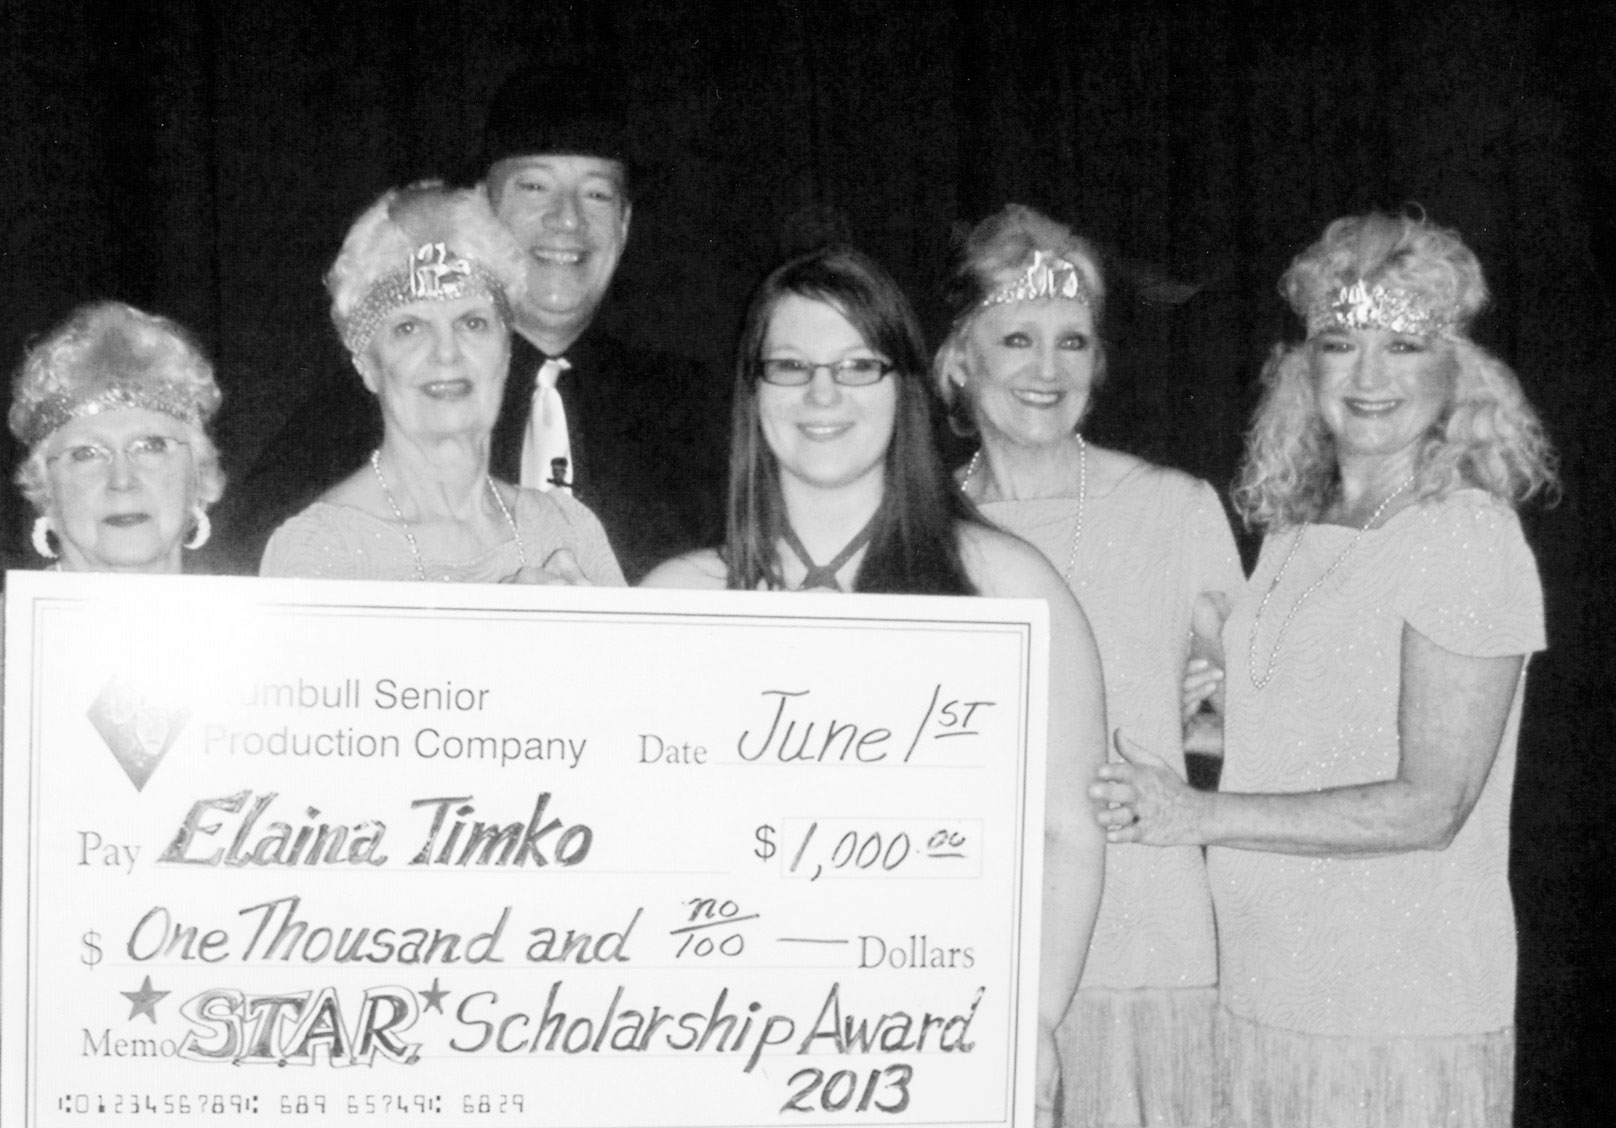 SPECIAL TO THE VINDICATOR
The Trumbull Senior Production Company recently presented Elaina Timko of LaBrae High School with a $1,000 scholarship to the Dana School of Music for her studies to become a music teacher. Those presenting the award, from left, are Carol Bovee, vice president; Jean Bolinger, treasurer; Jason Burgermyer, president; Timko; Jeannie Trask, board member; and Leslie Wilkinson, member. To qualify for the scholarship, applicants are required to graduate from a Trumbull County high school with plans to major in some phase of the performing arts.